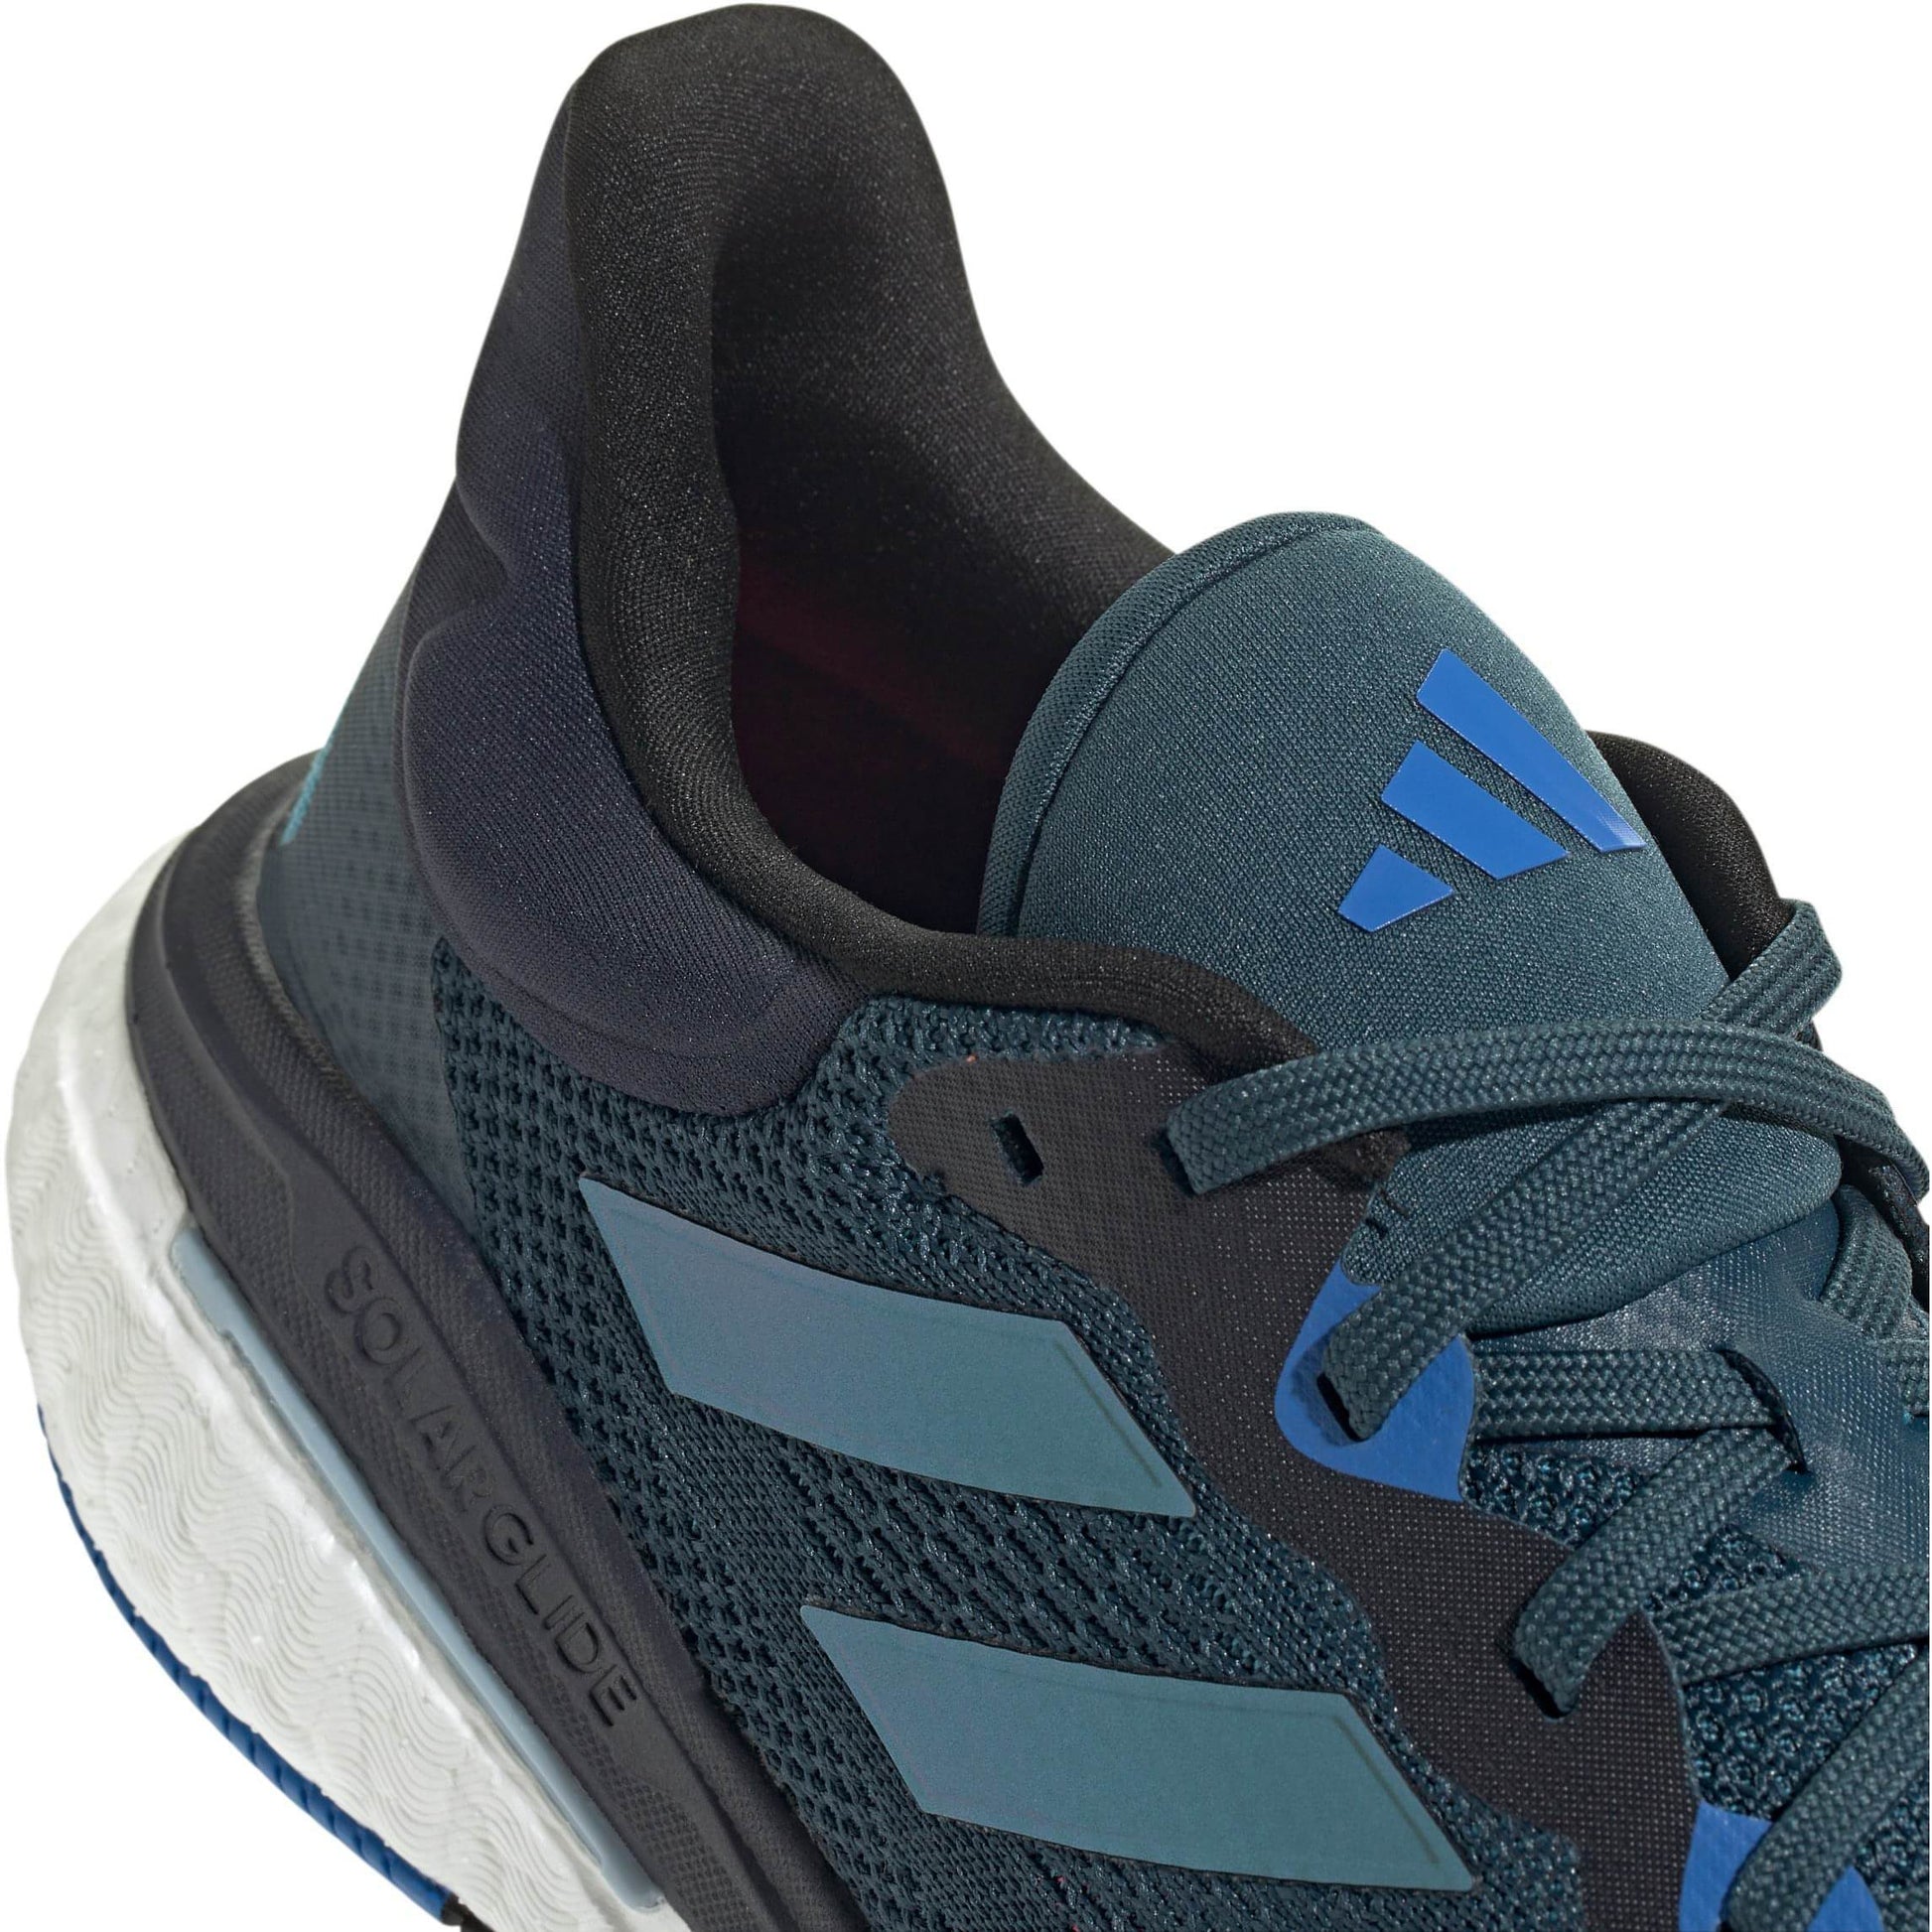 Adidas Solarglide Shoes If4853 Details